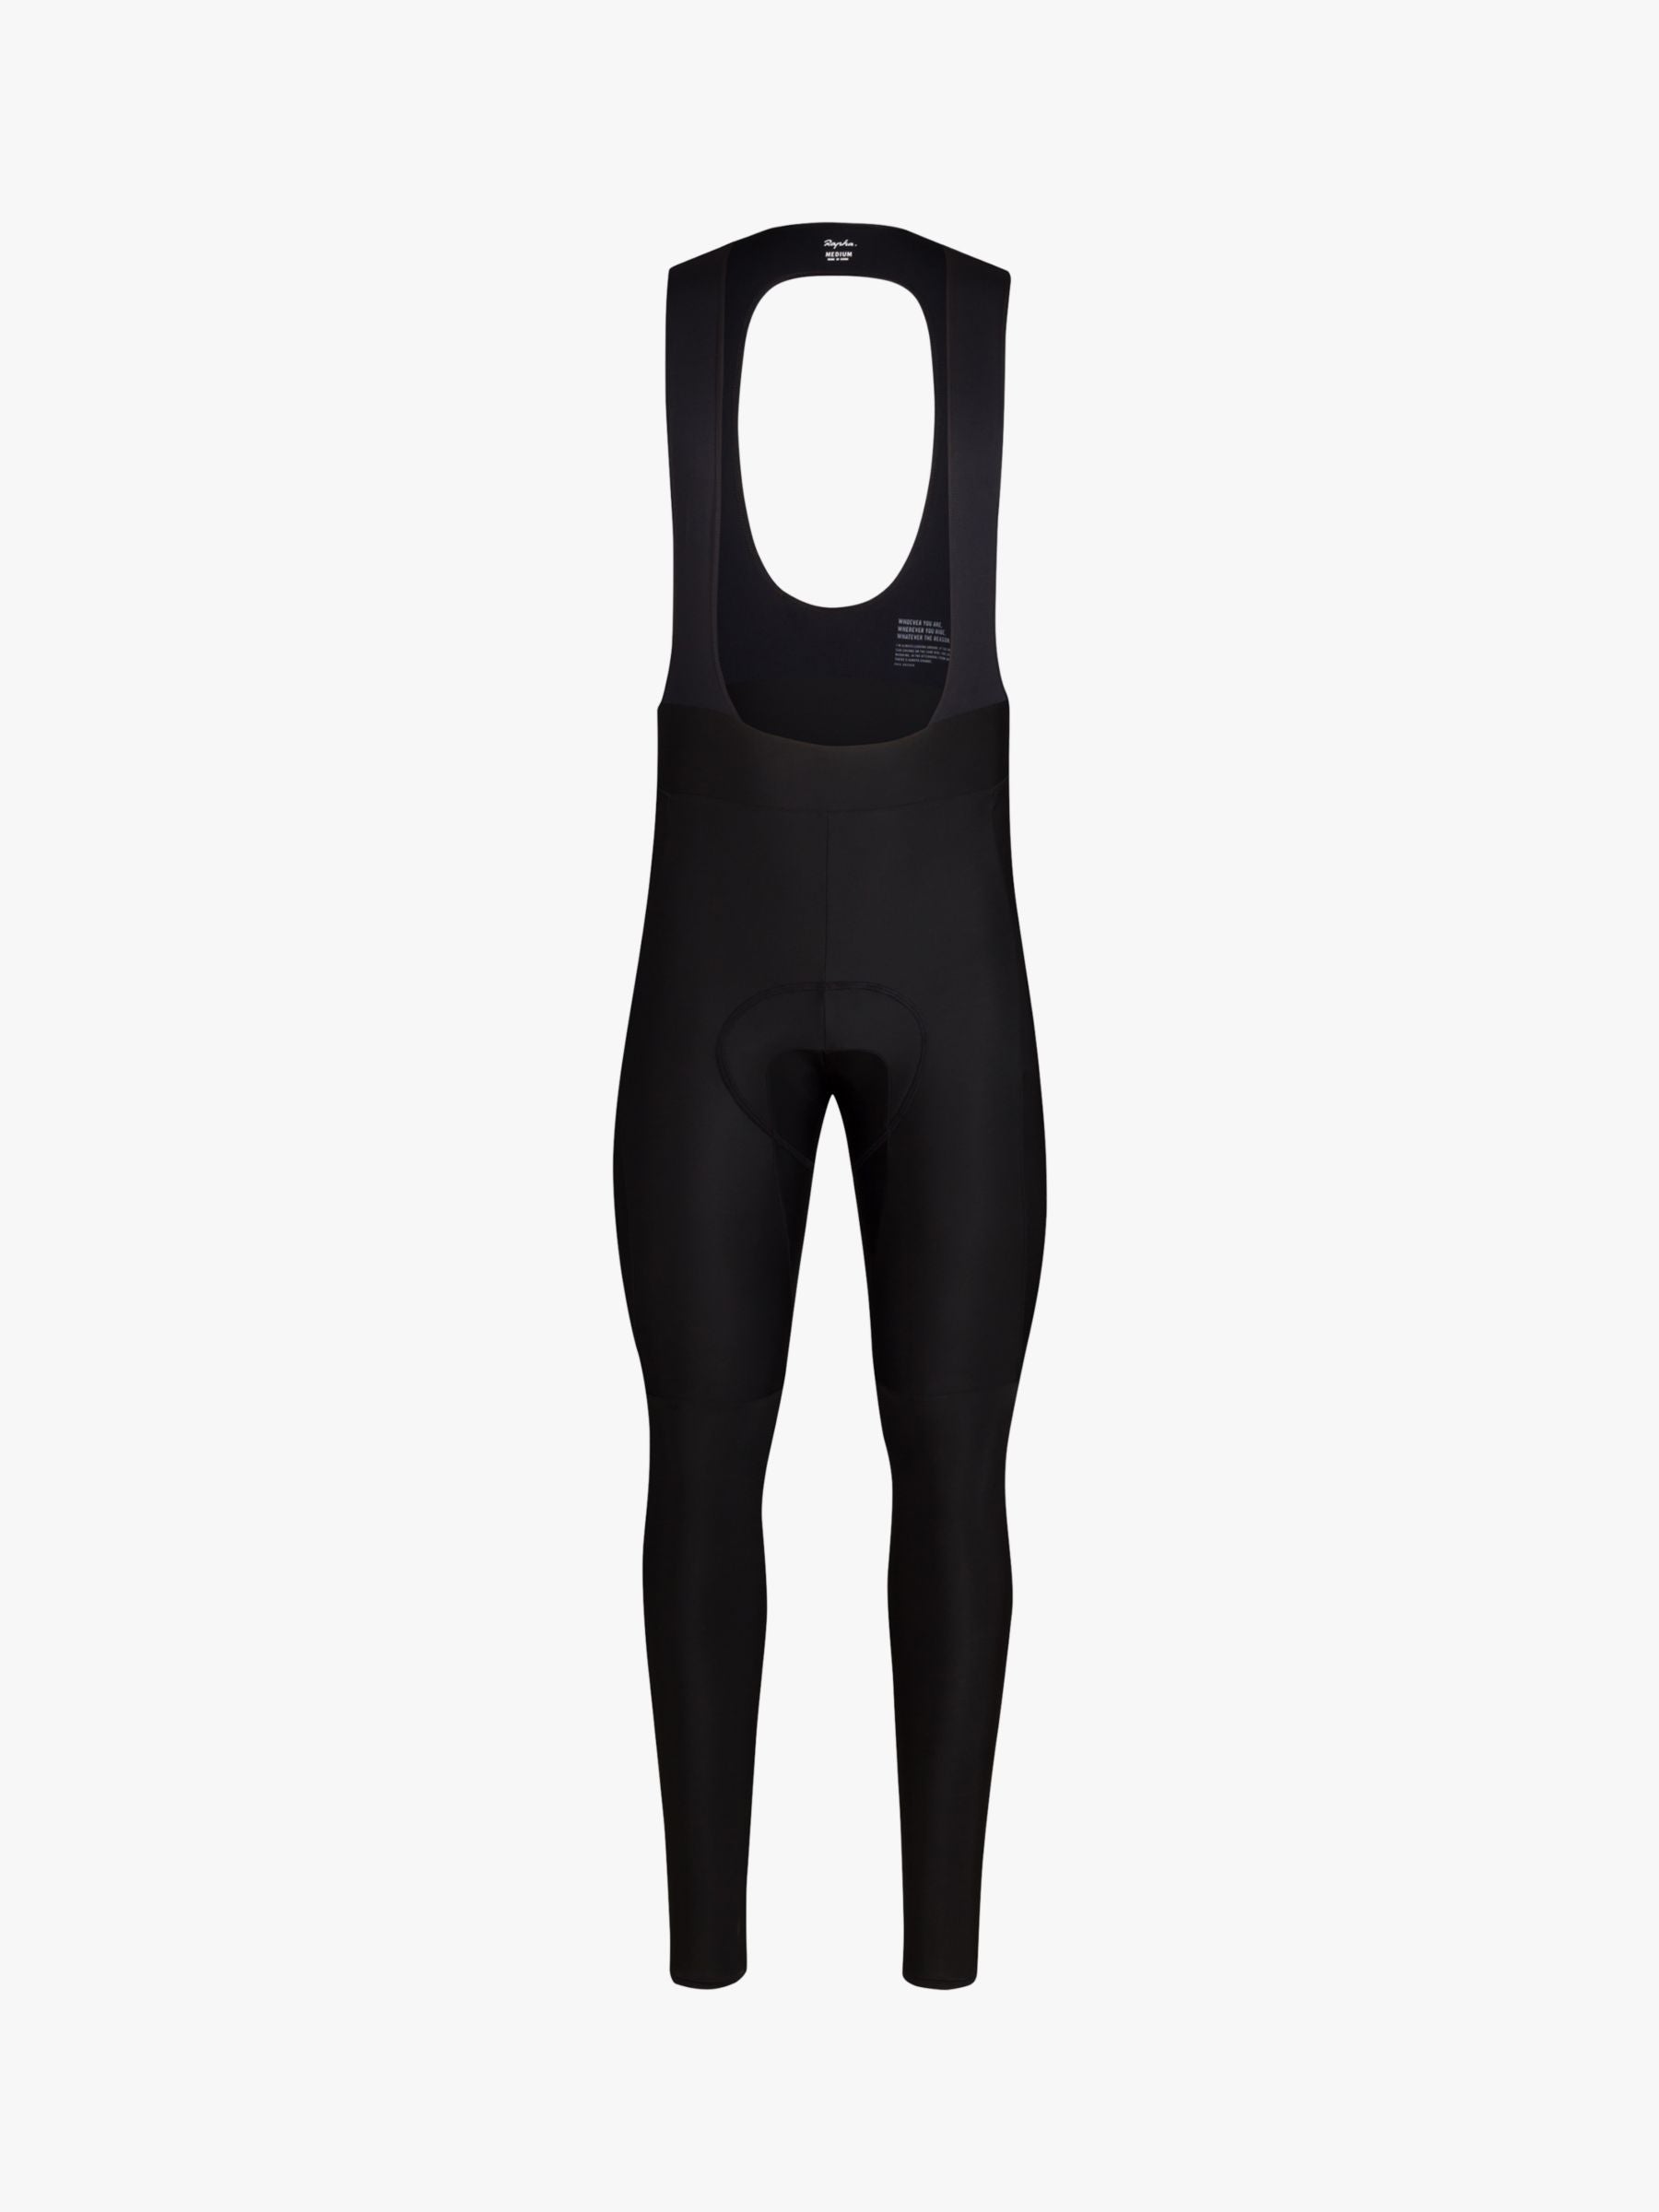 Rapha Women’s Core Winter Tights with Pad - Black